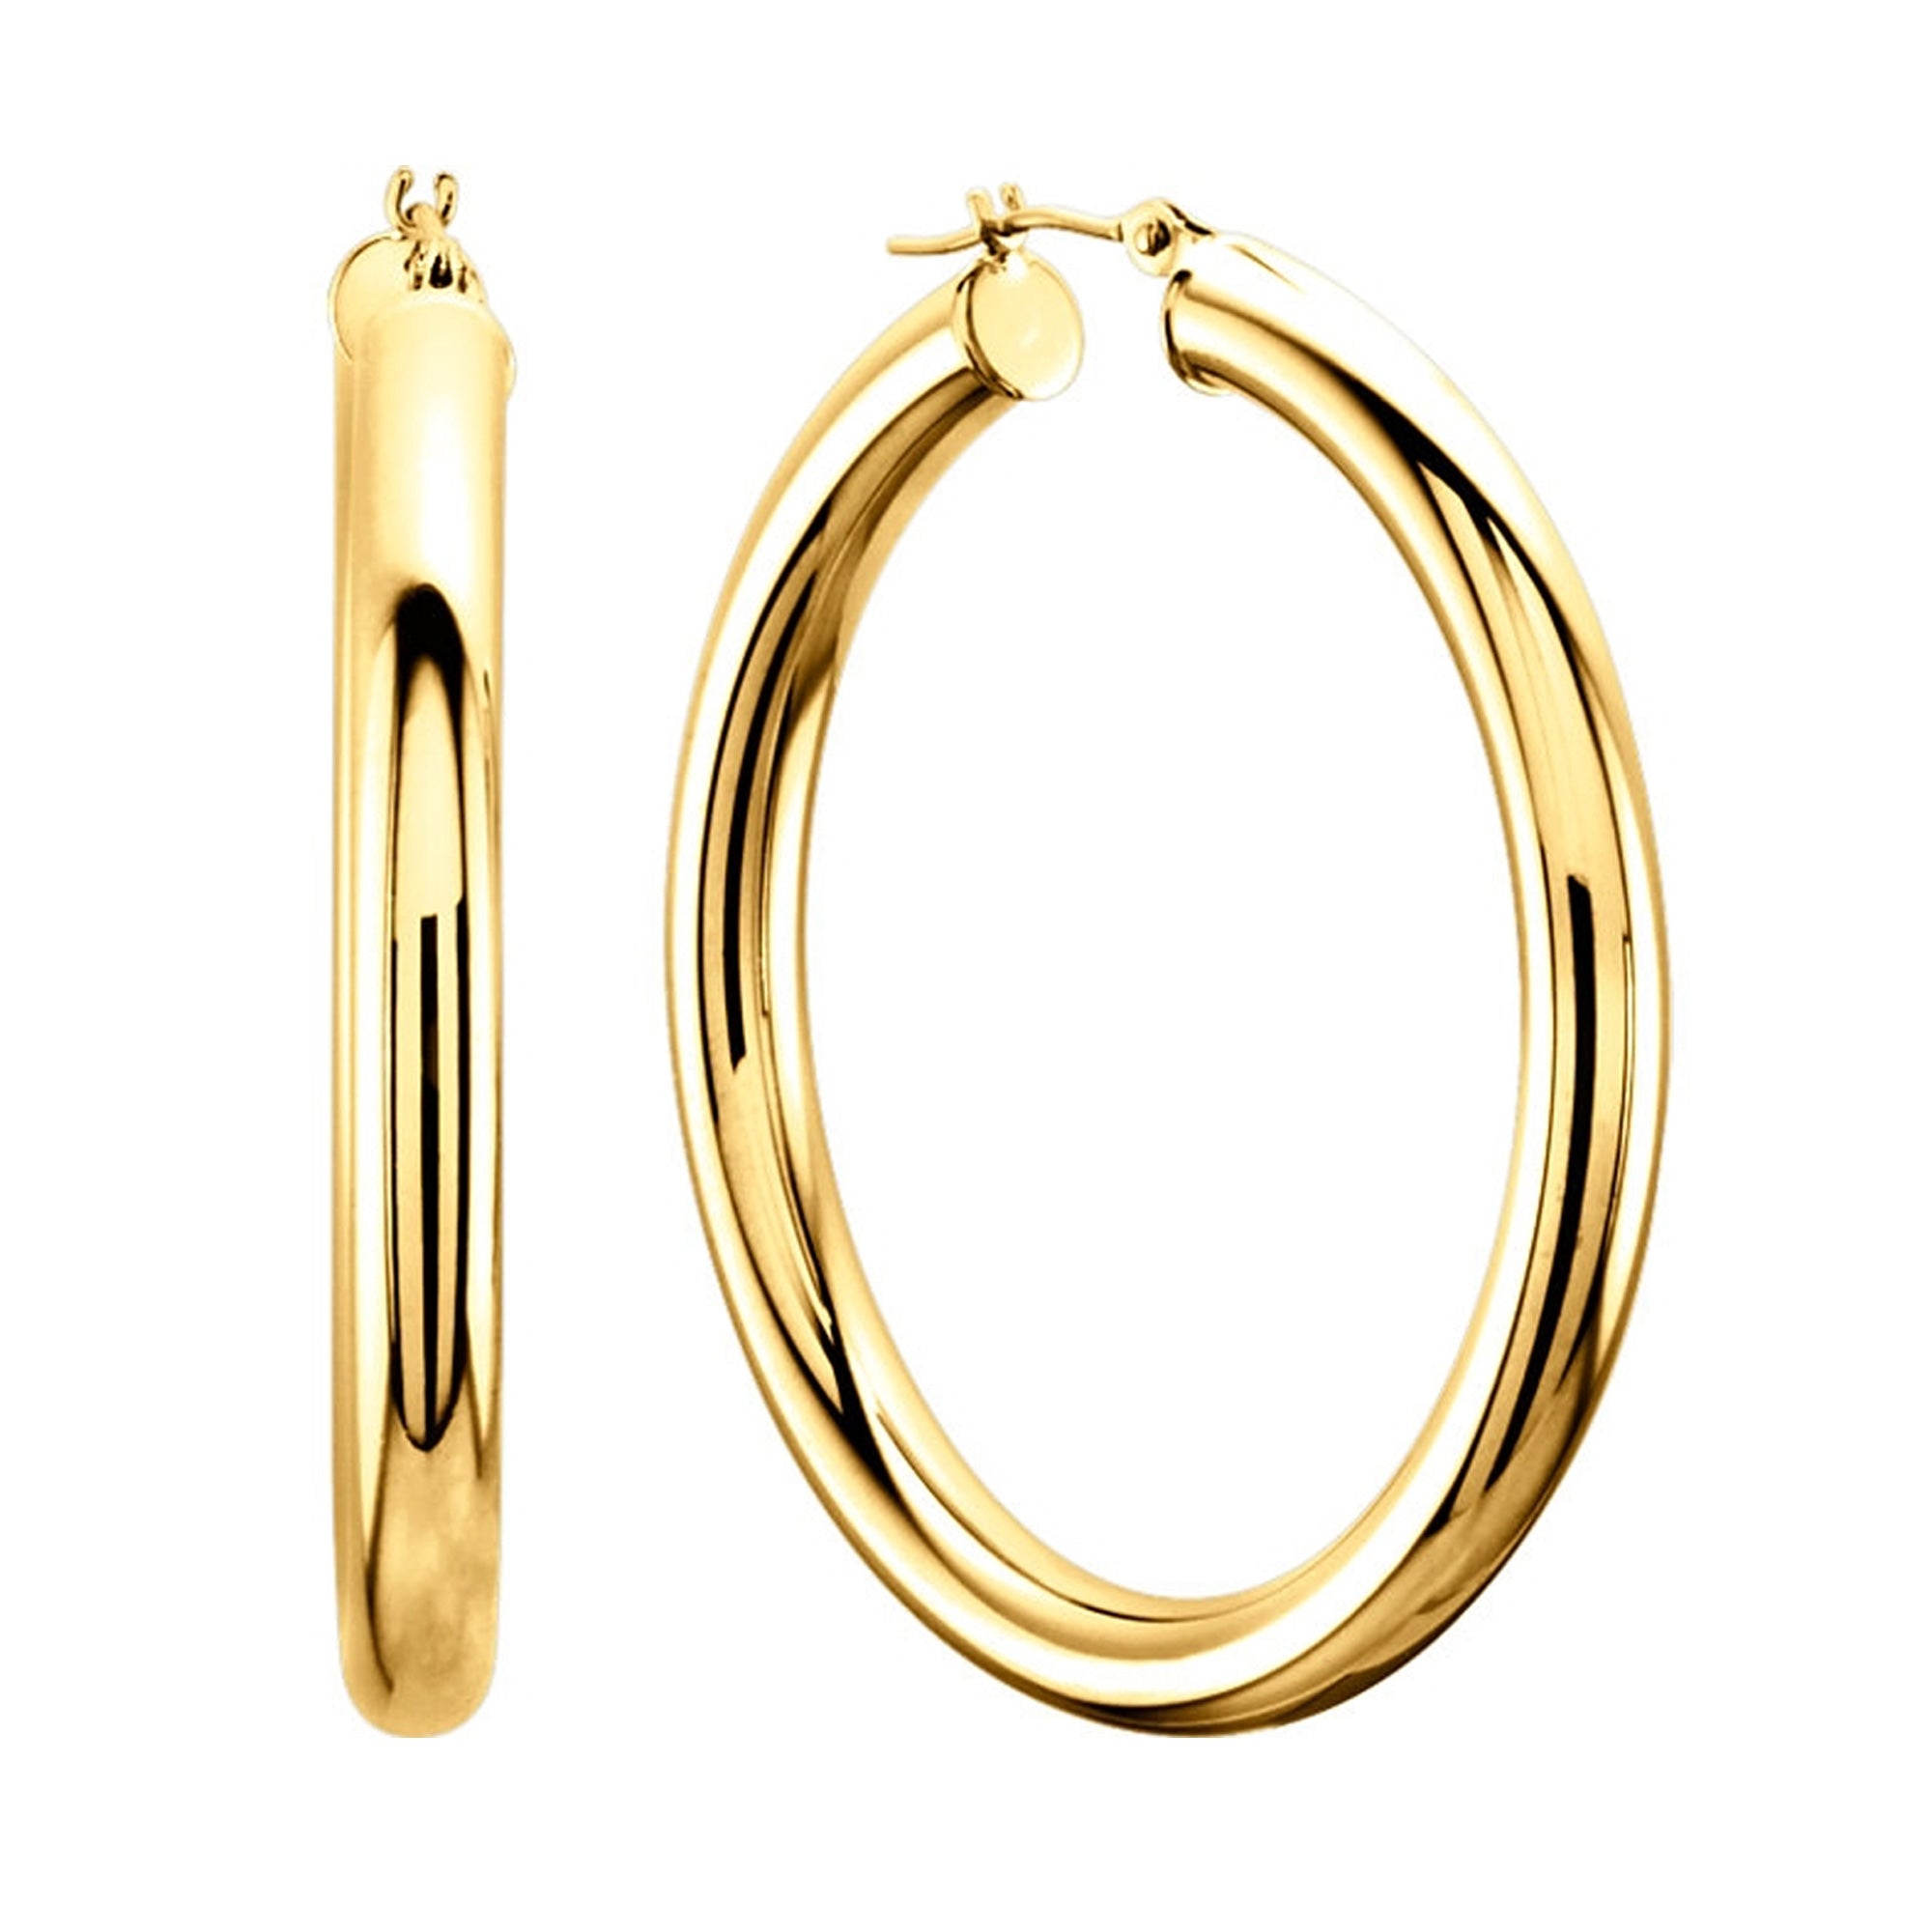 10k Yellow Gold 3mm Shiny Round Tube Hoop Earrings fine designer jewelry for men and women